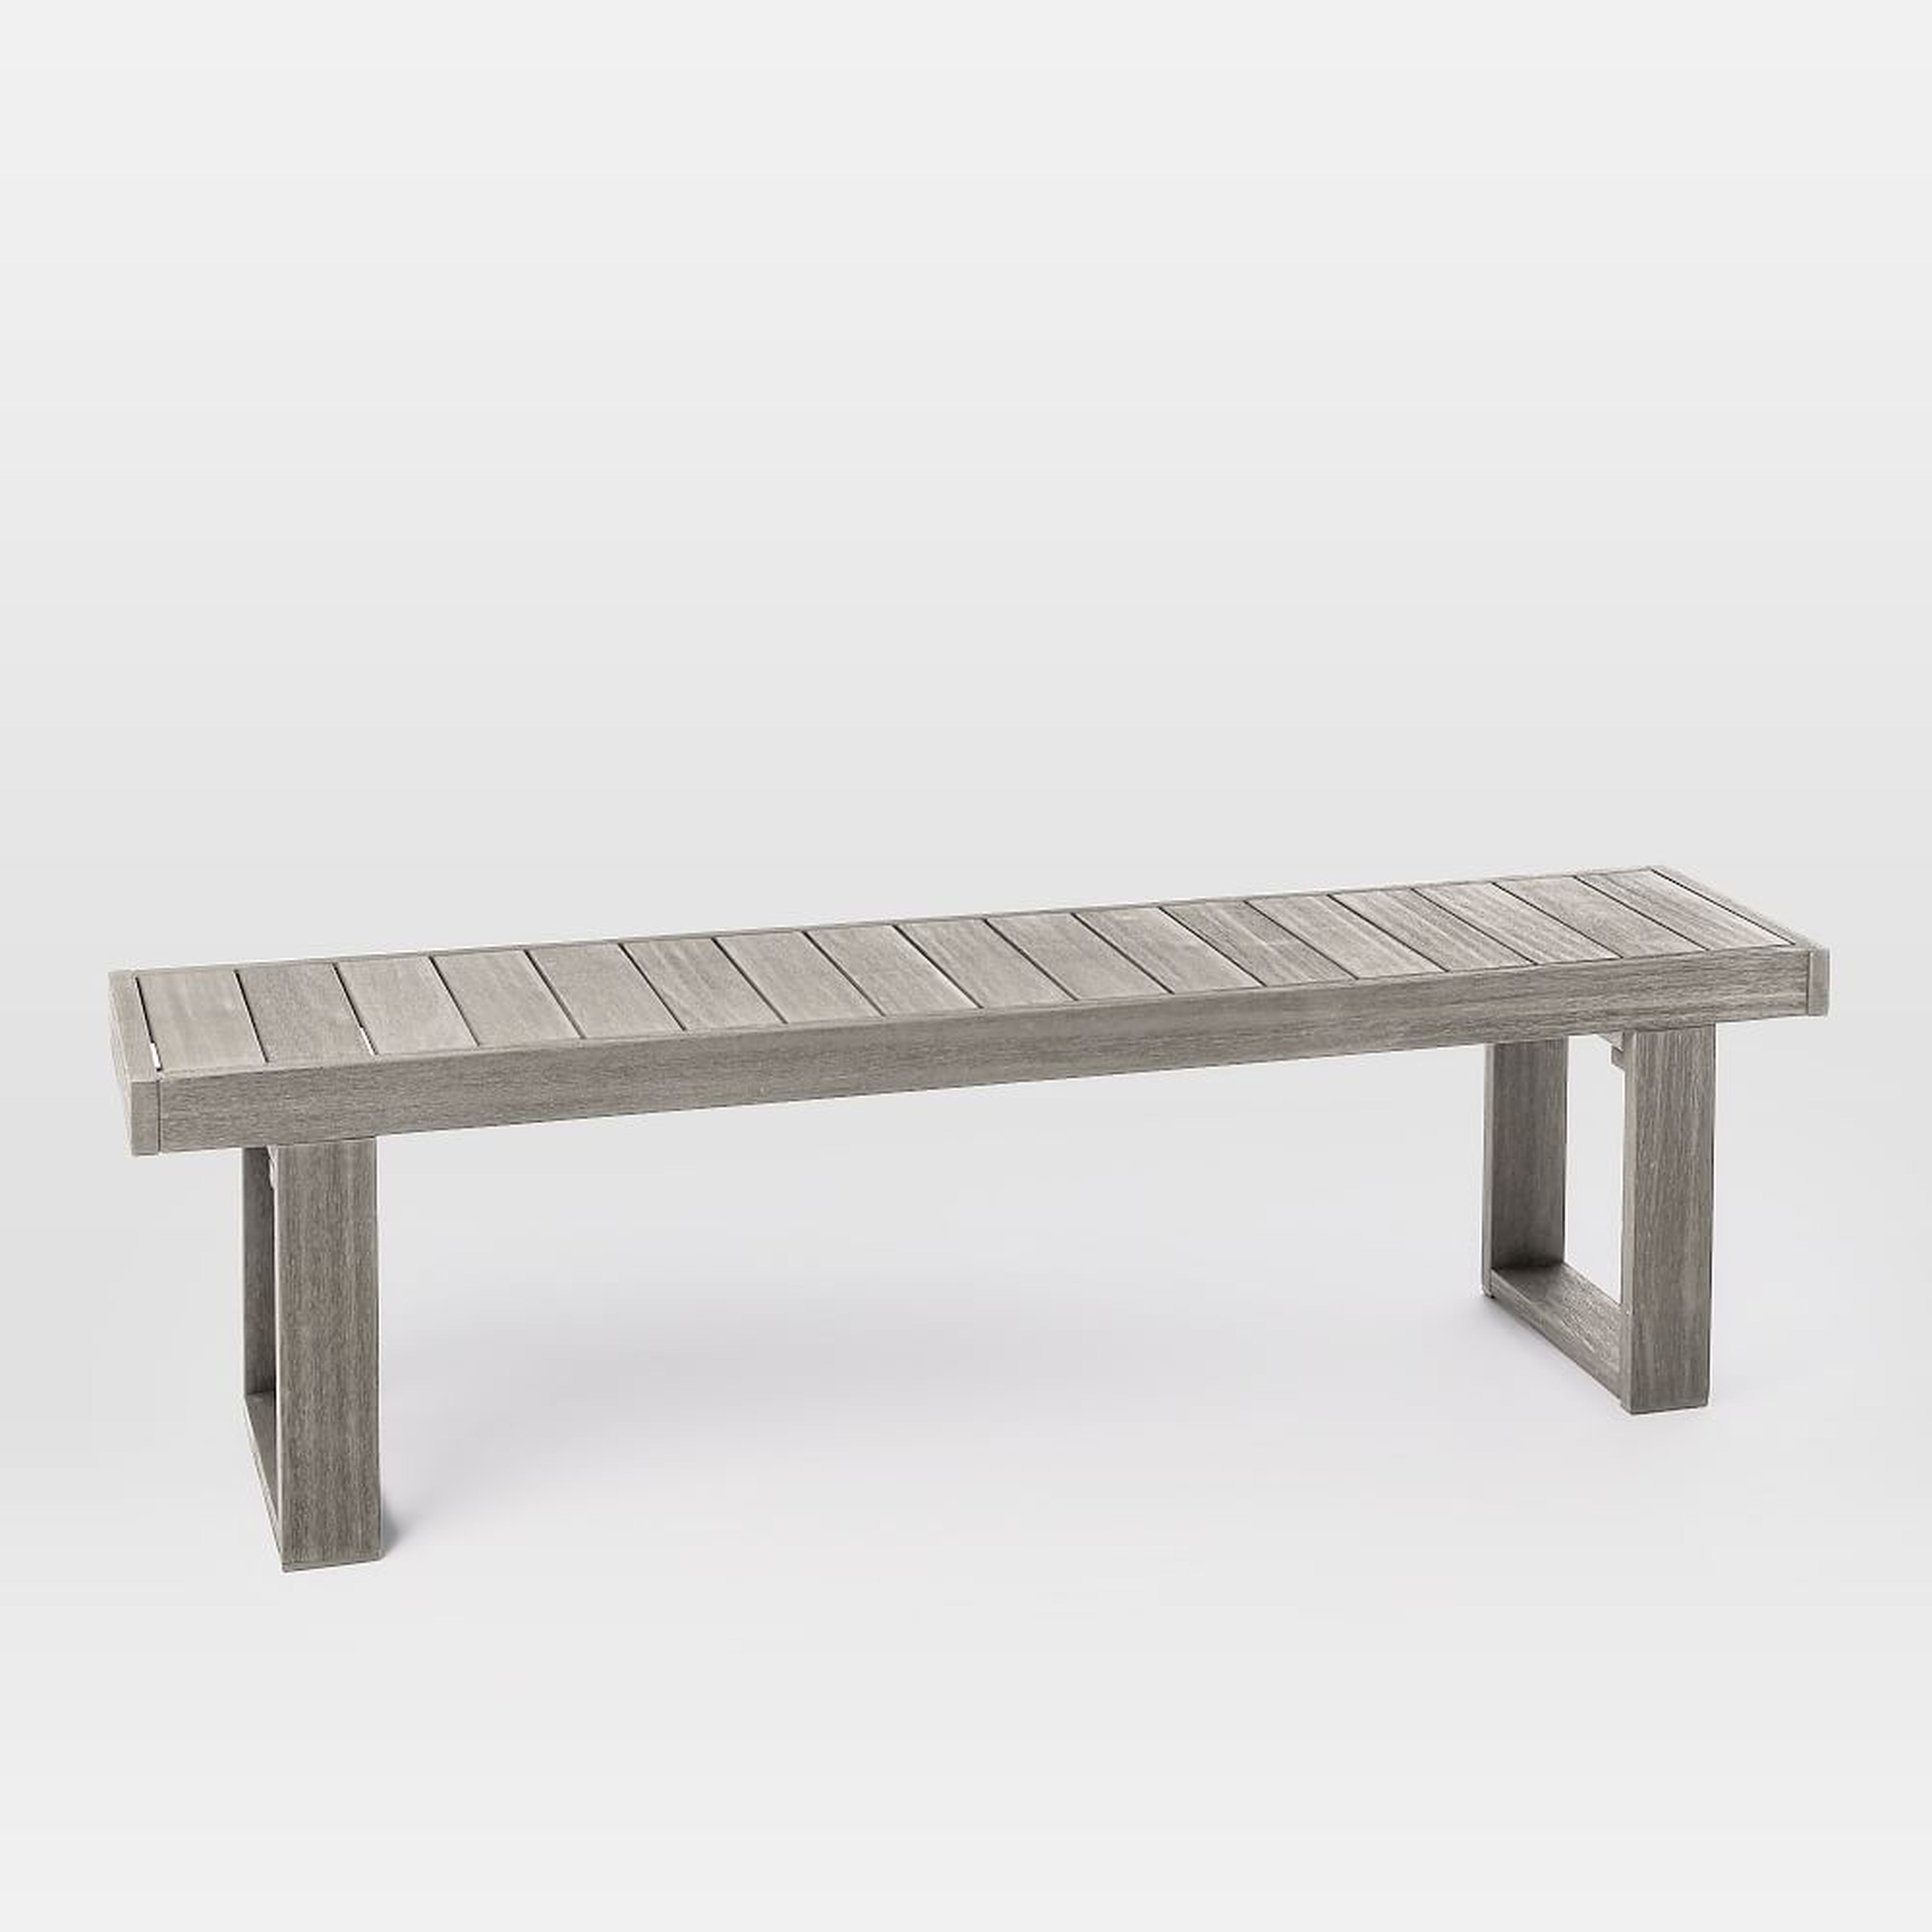 Portside Outdoor Dining Bench, 66", Weathered Gray - West Elm